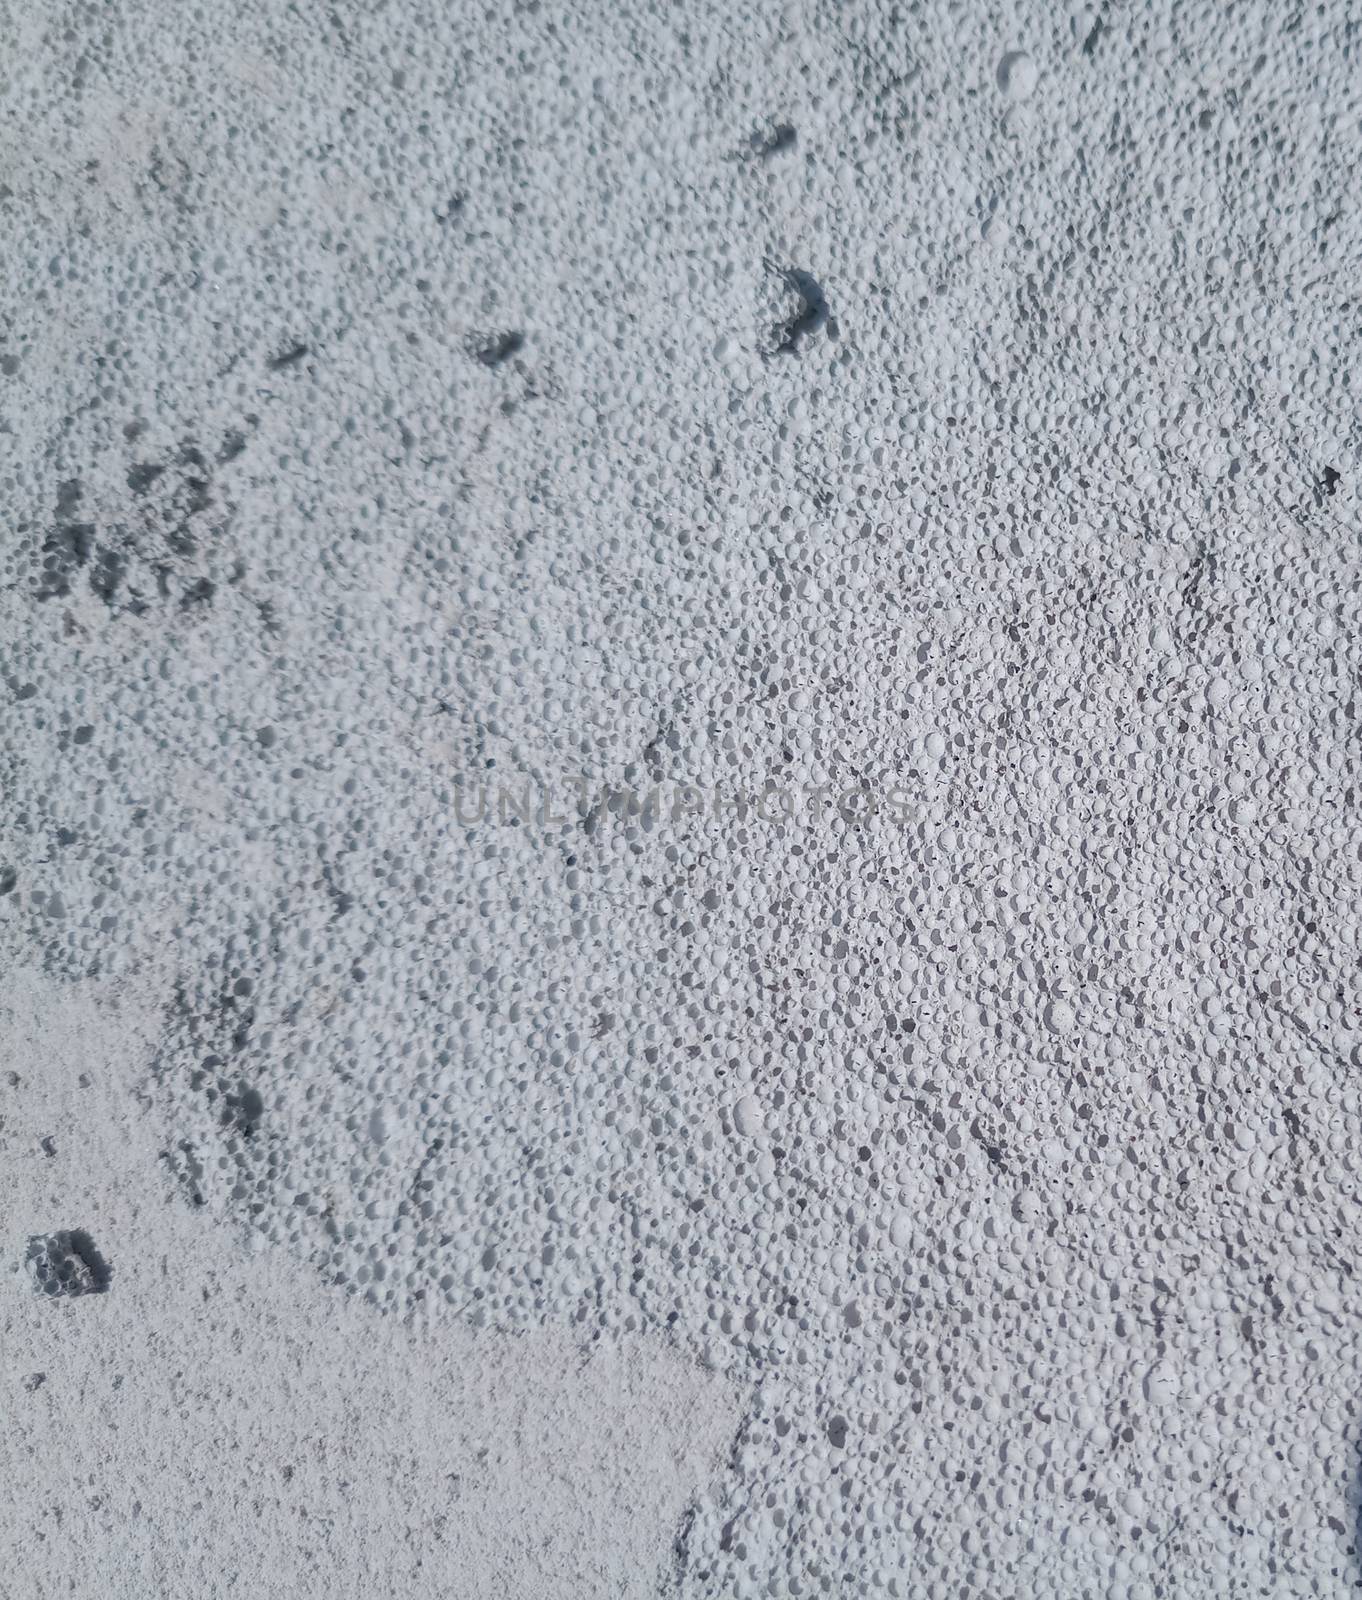 Background texture of a white gas block. Building material gas block.